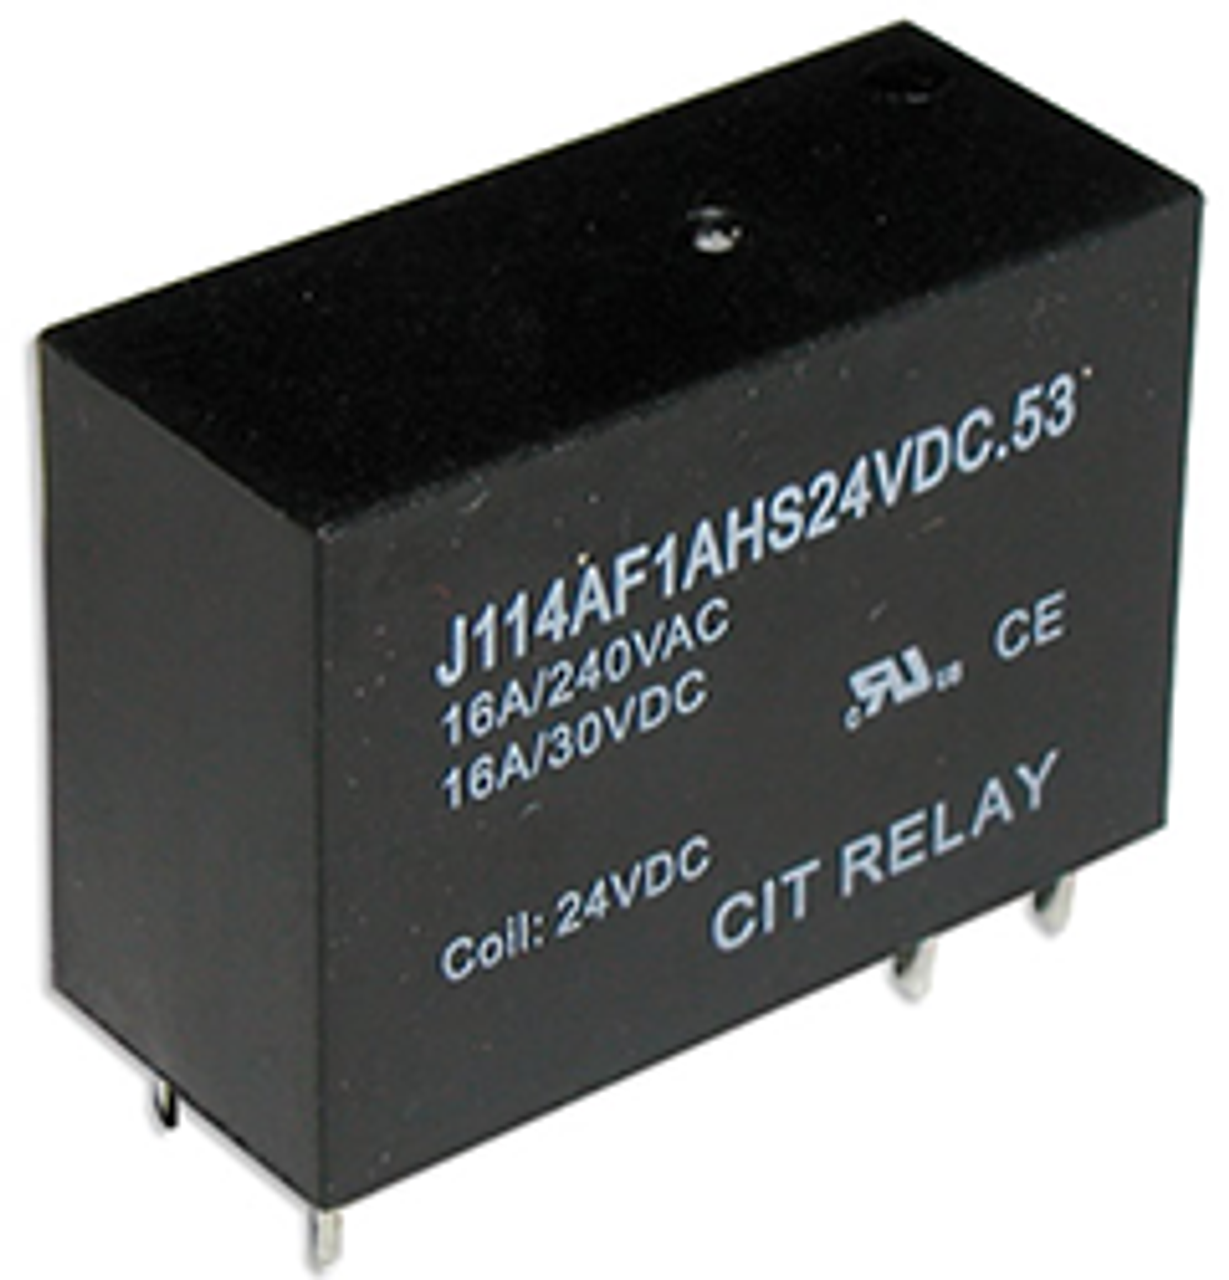 CIT Relay and Switch J114AF2CS5VDC.53 Power Relays